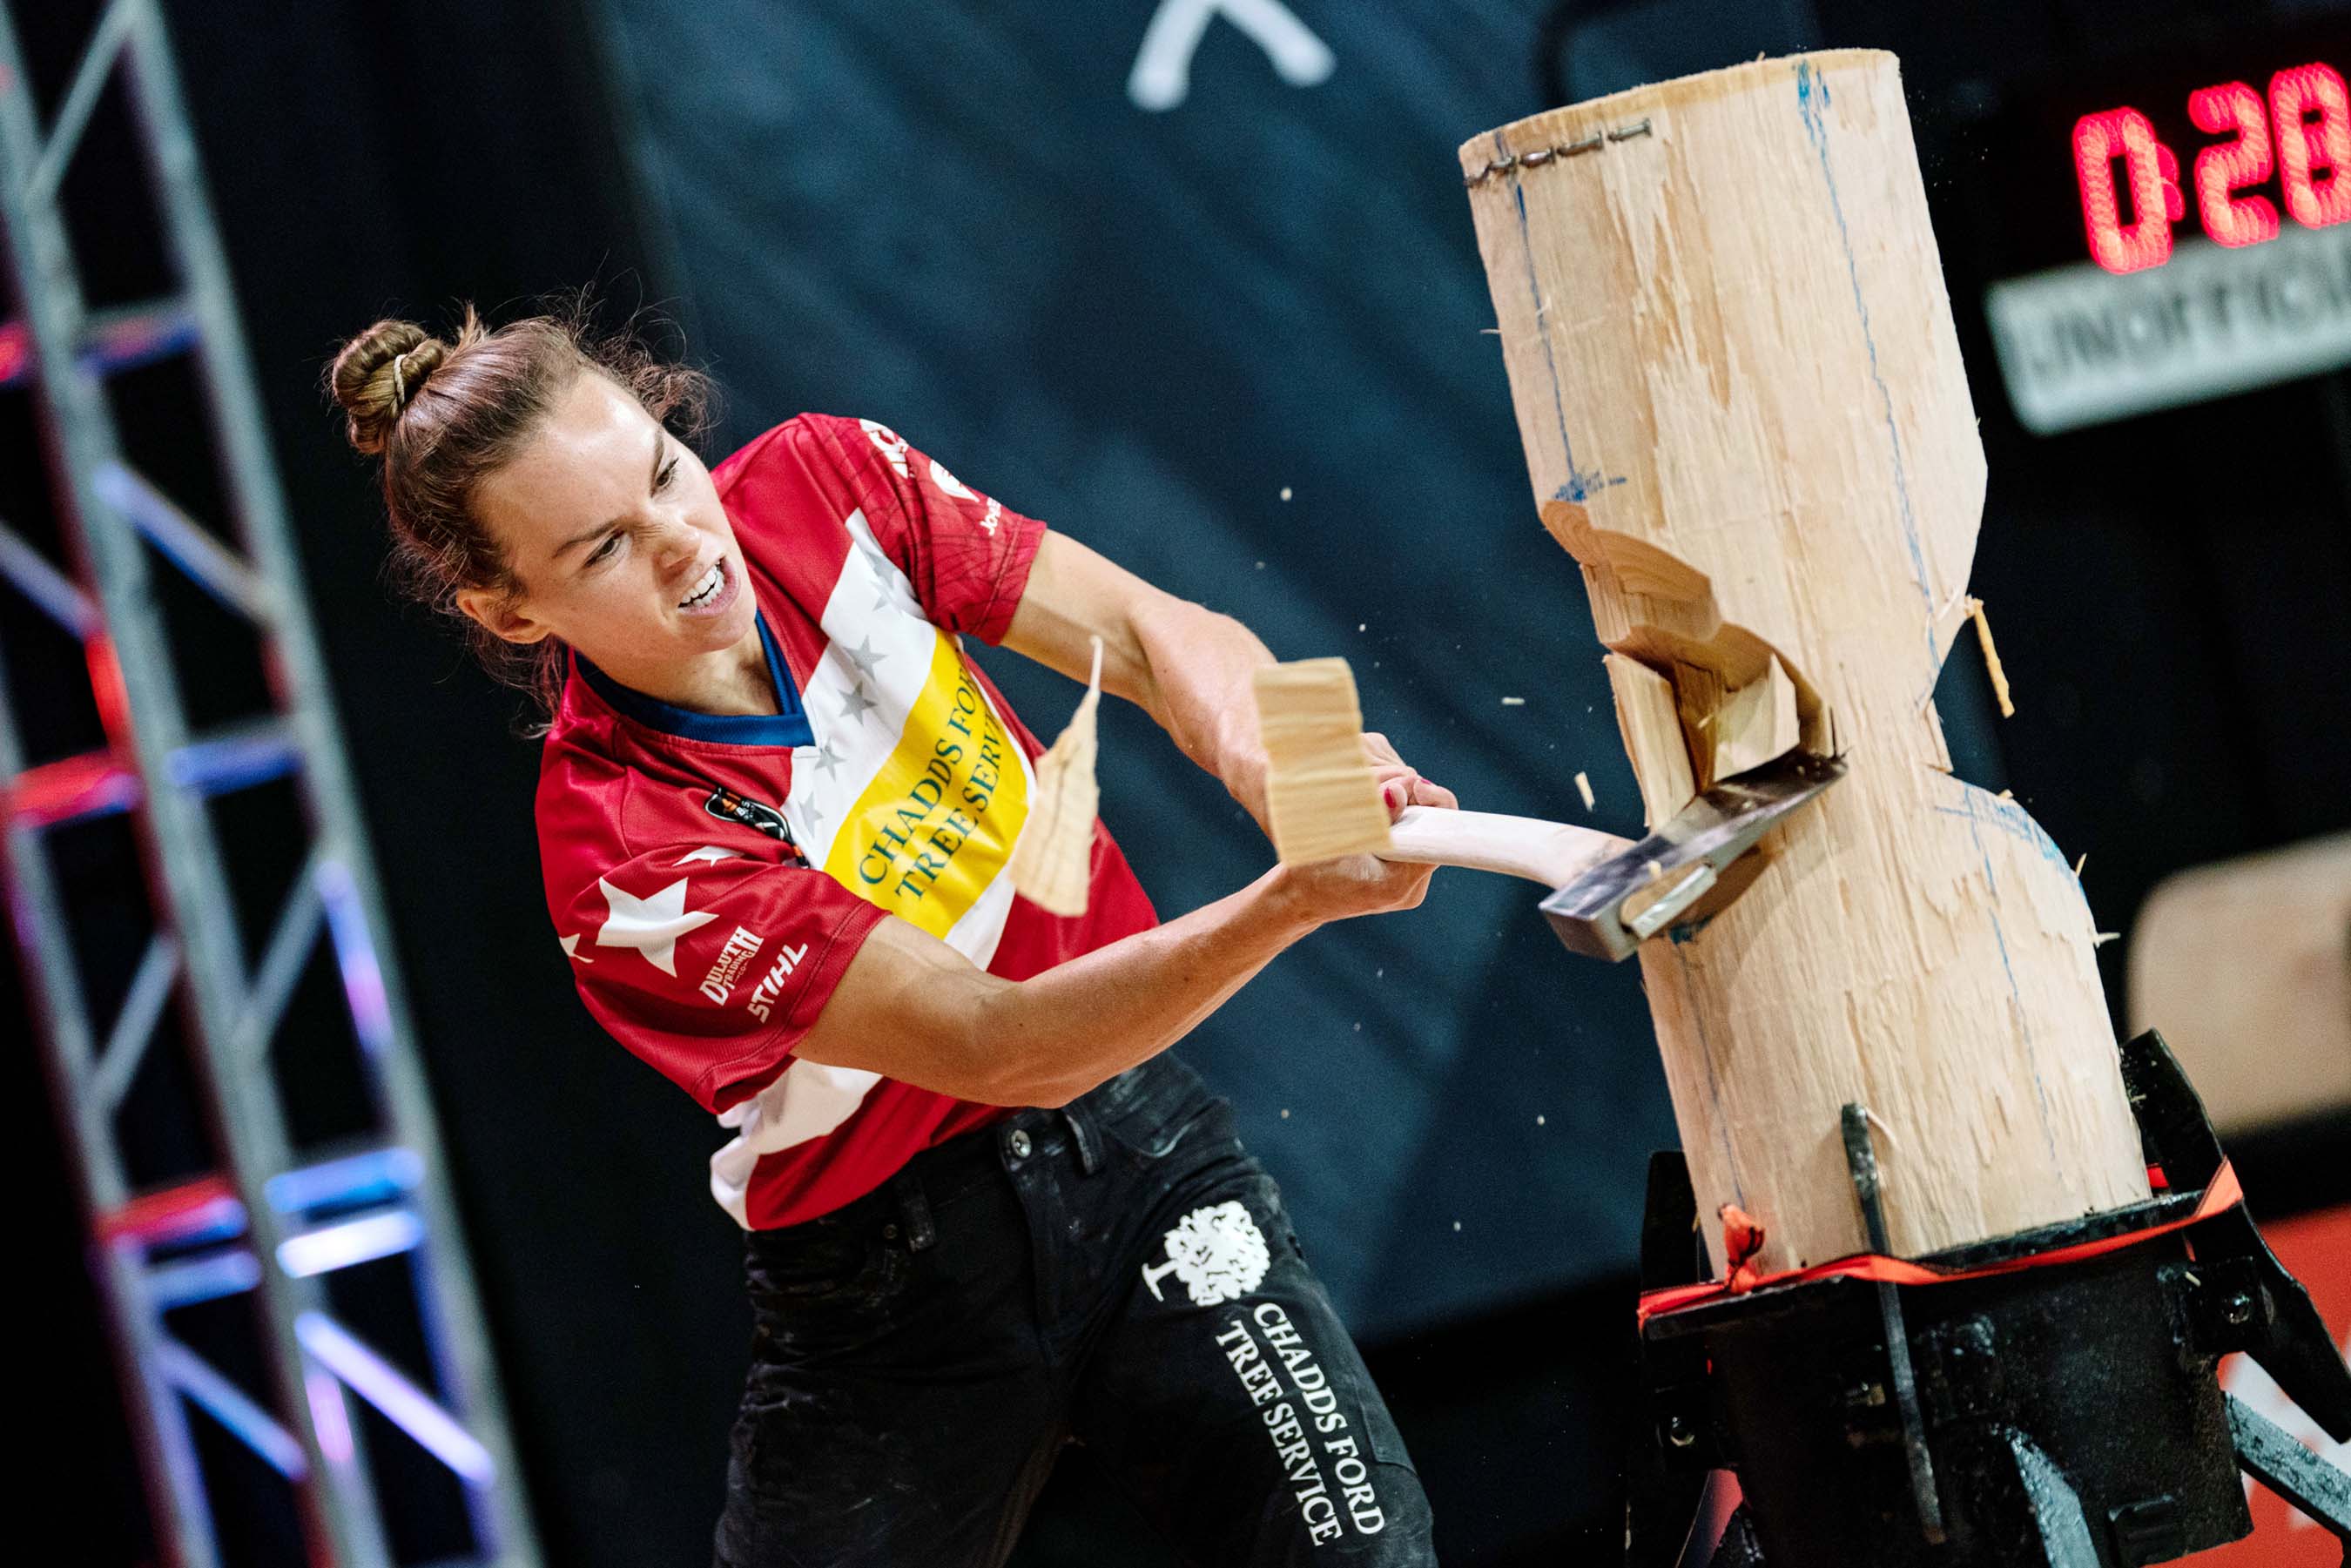 Martha King, 2019 U.S. STIHL TIMBERSPORTS Women's Division Champion, competes in the Standing Block, a fourth discipline added to the Women's Division this season.